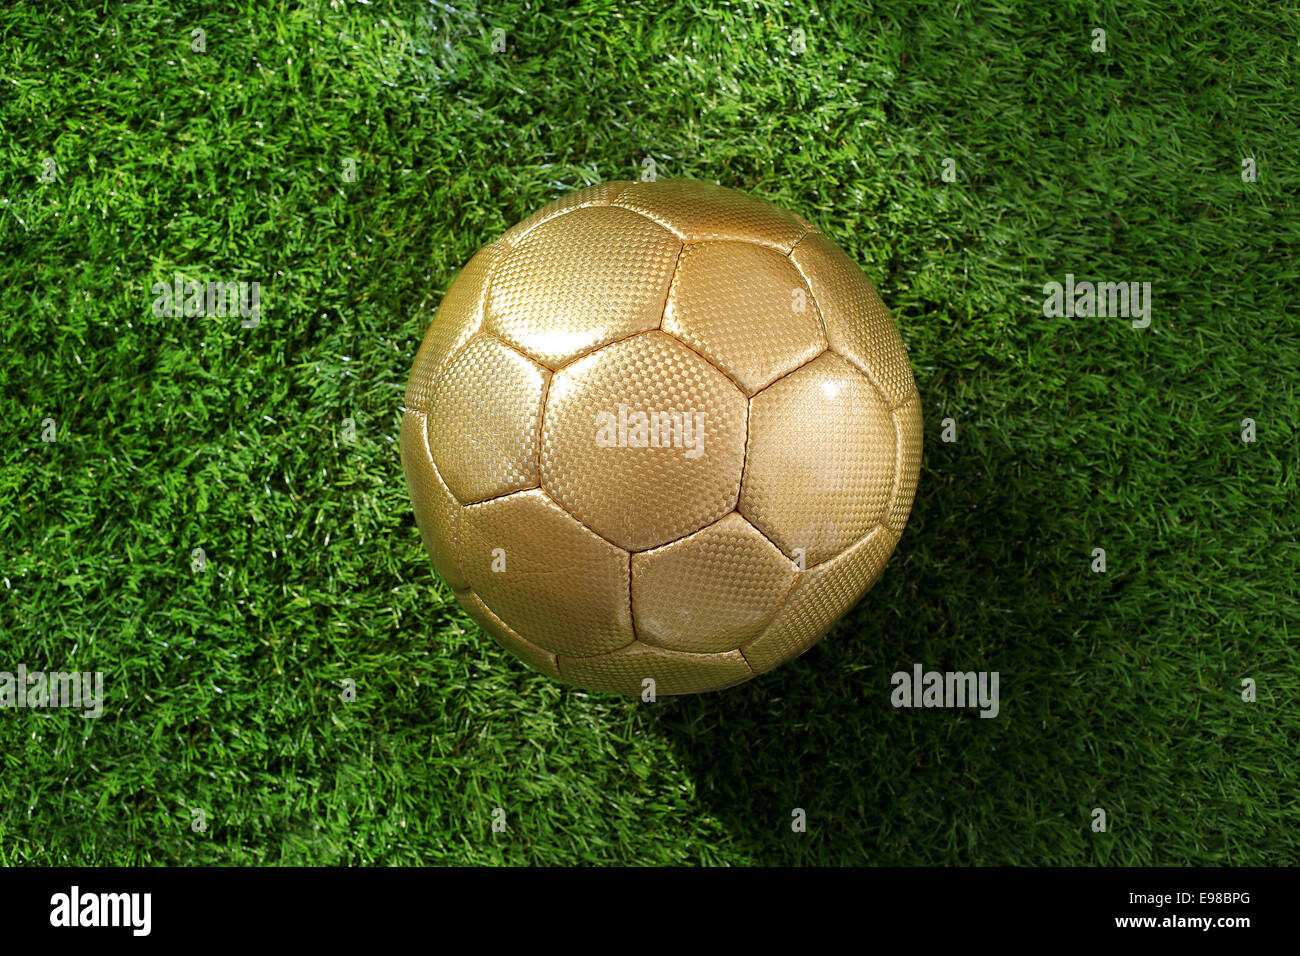 Overhead view of a gold coloured soccer ball on lush green grass with copyspace Stock Photo